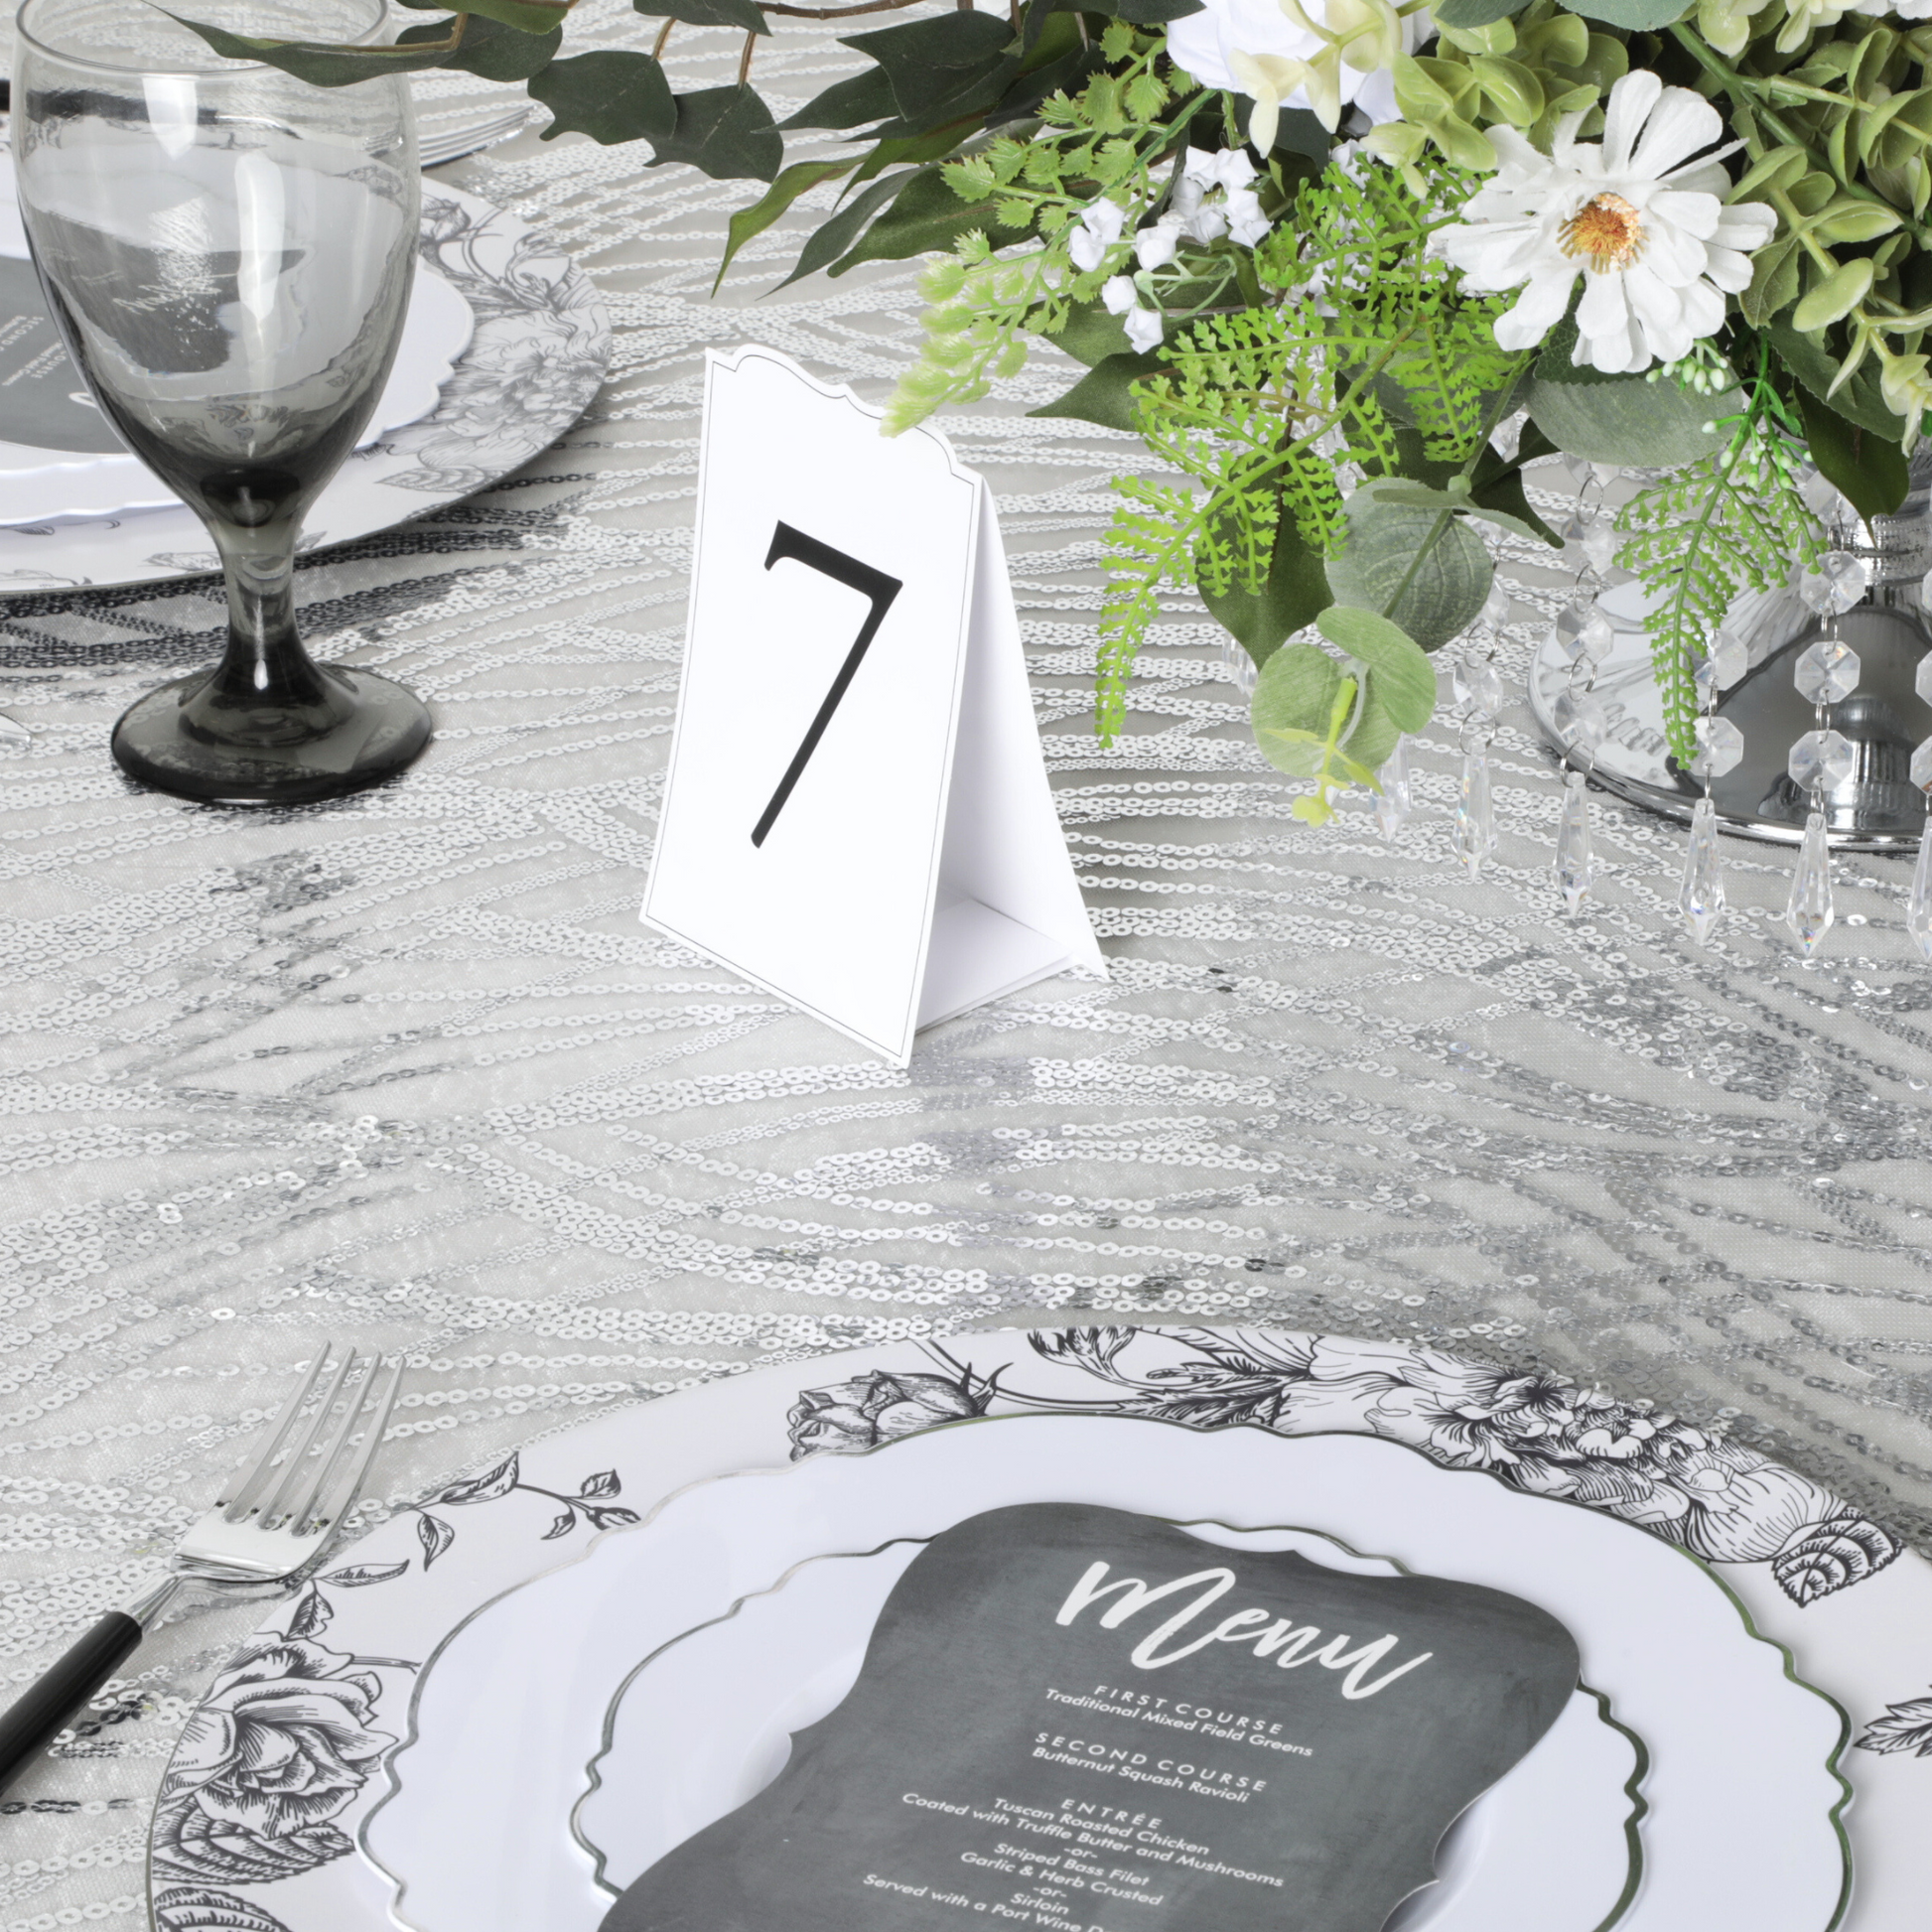 Wave Sequin Mesh Tablecloth 120" Round - Silver